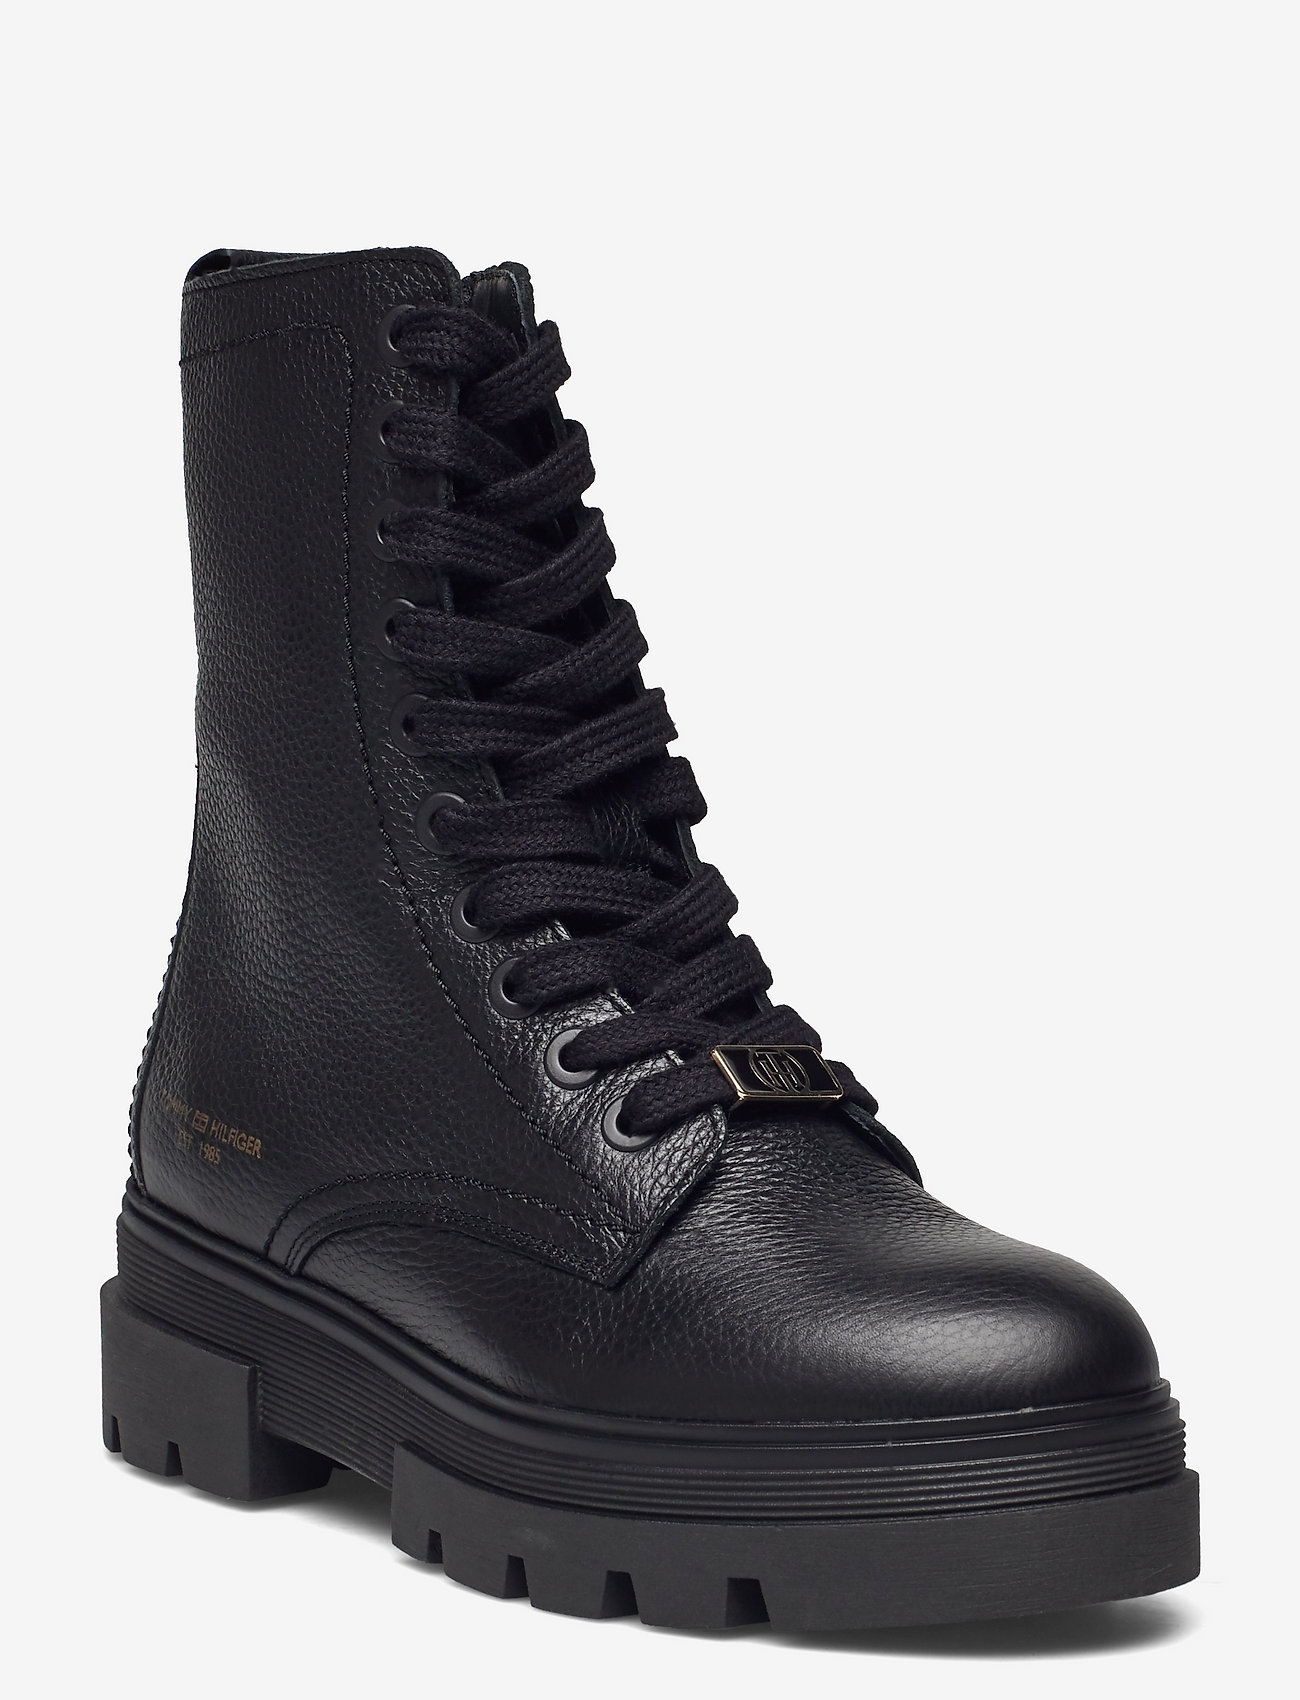 Tommy Hilfiger Monochromatic Lace Up Boot - Flat ankle boots | Boozt.com